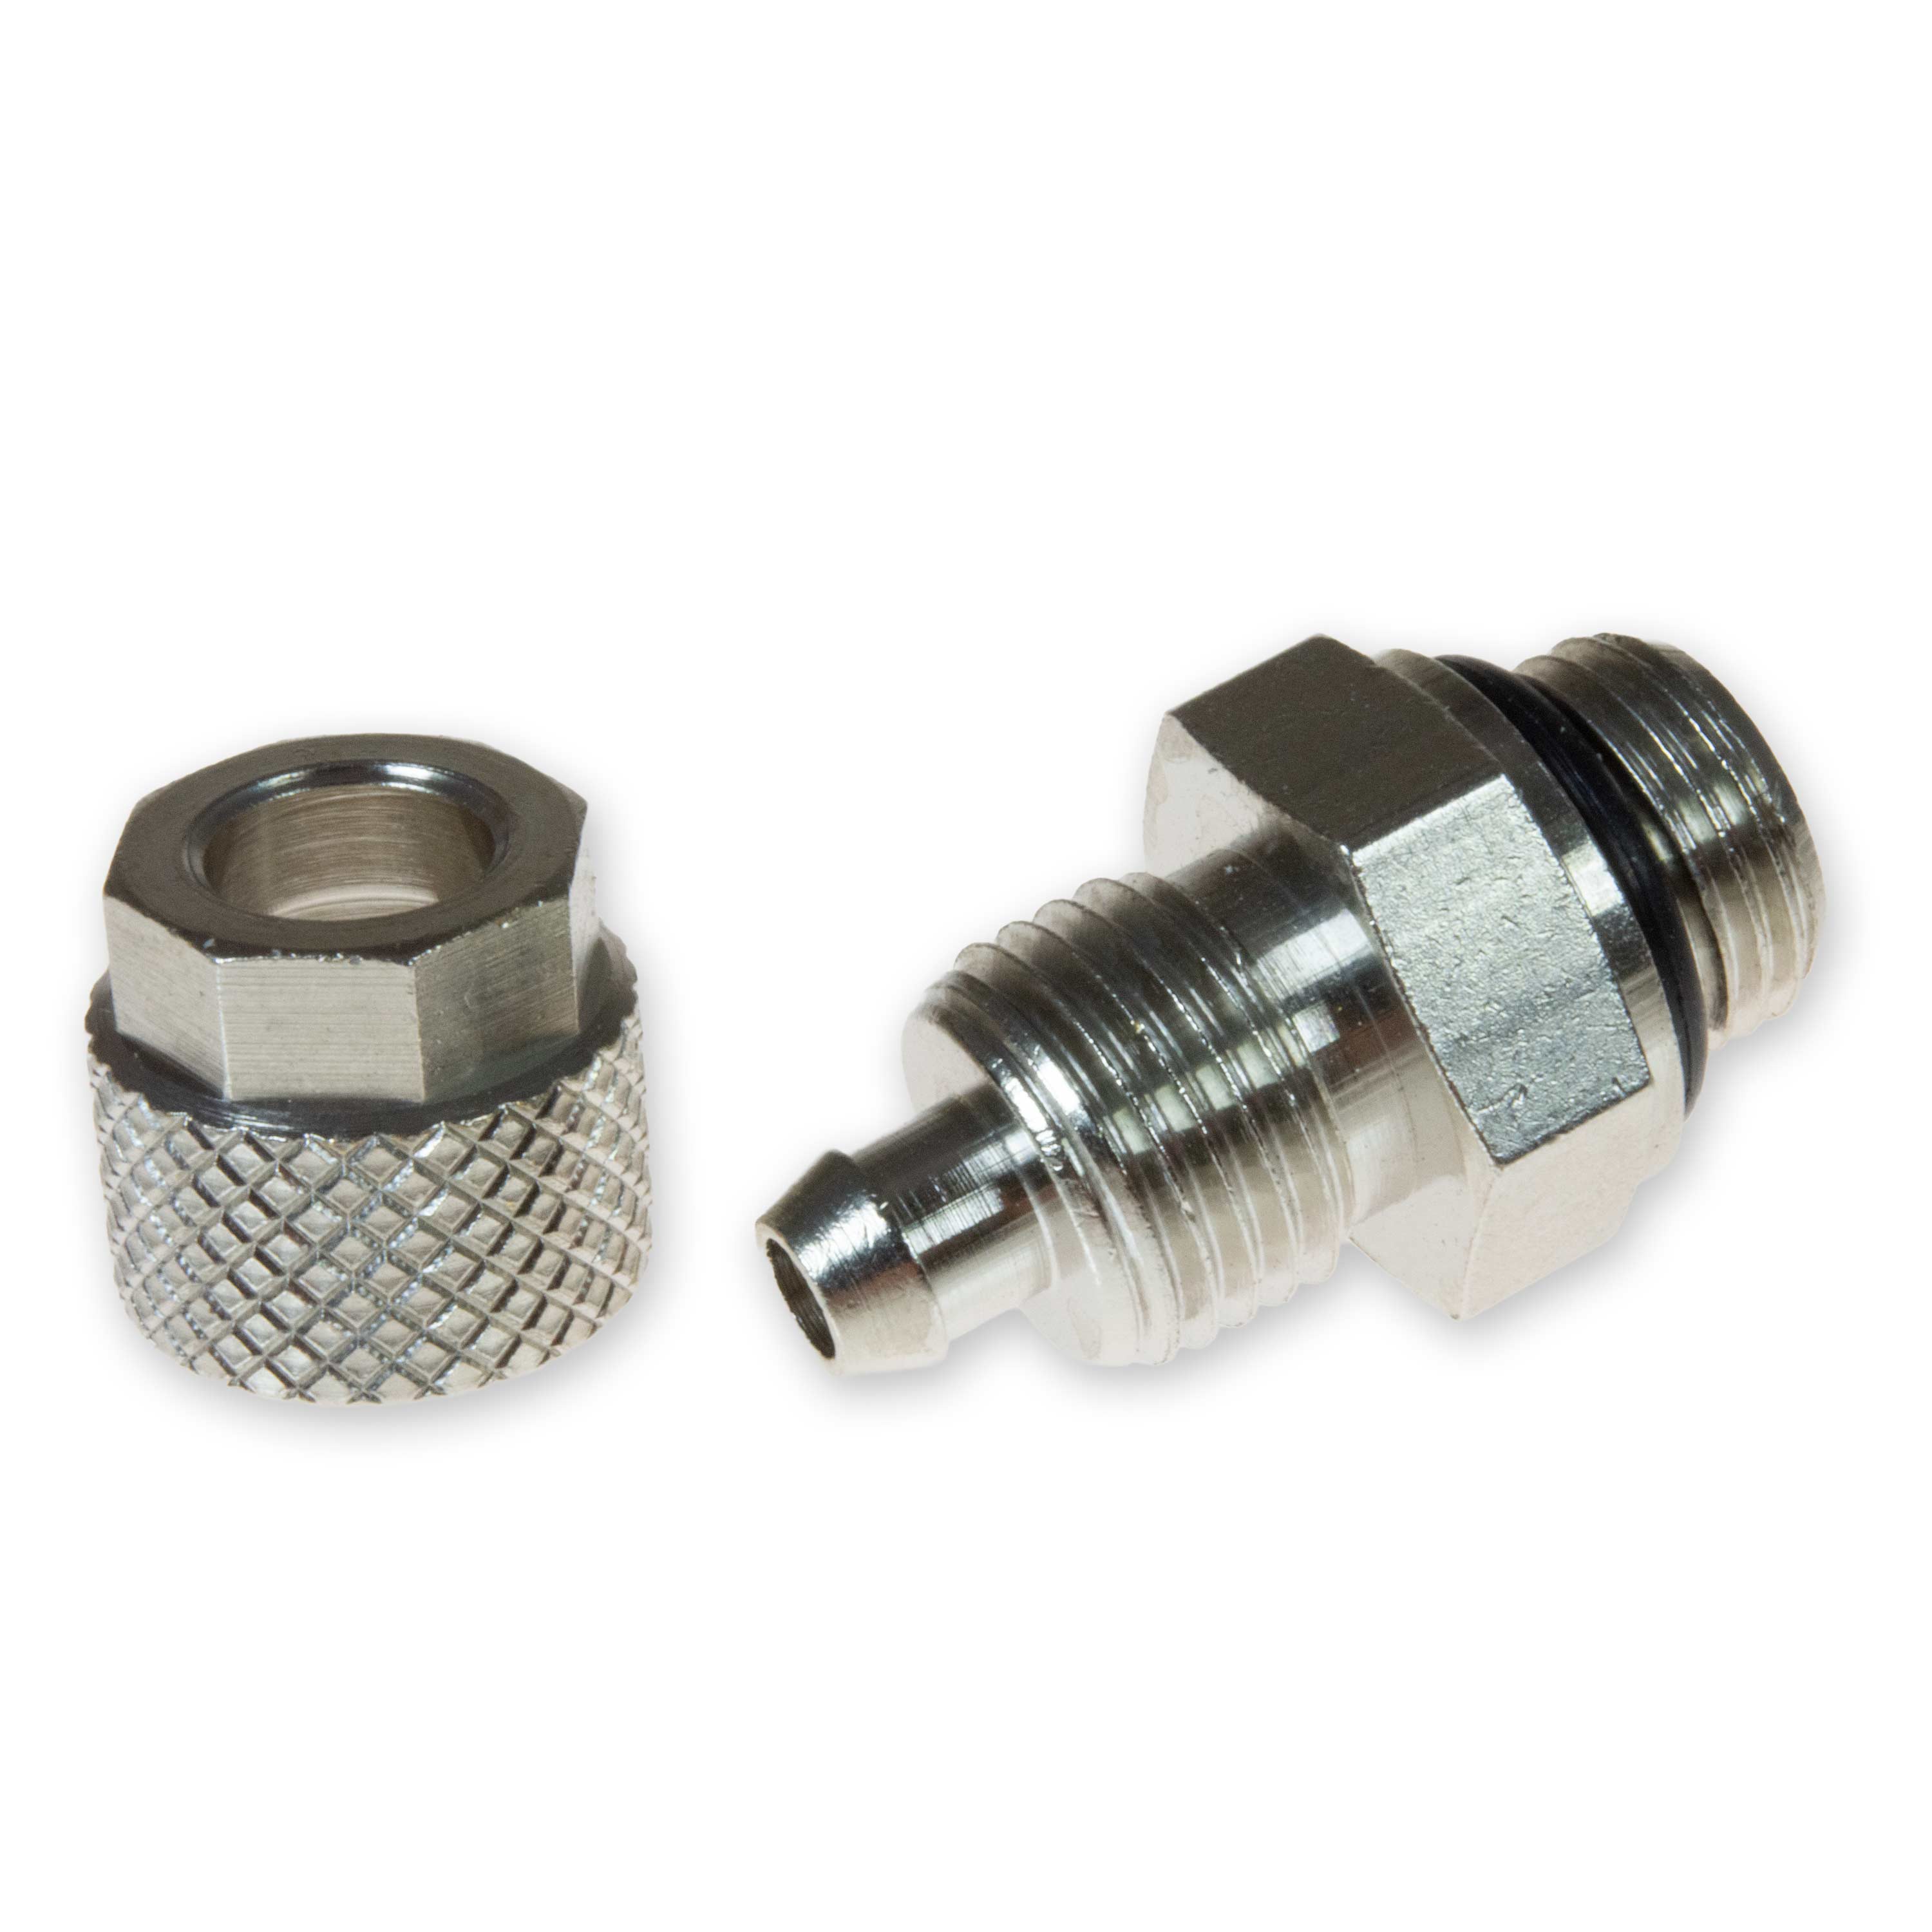 Hose connection 1/8" × 6/4 nickel-plated brass open